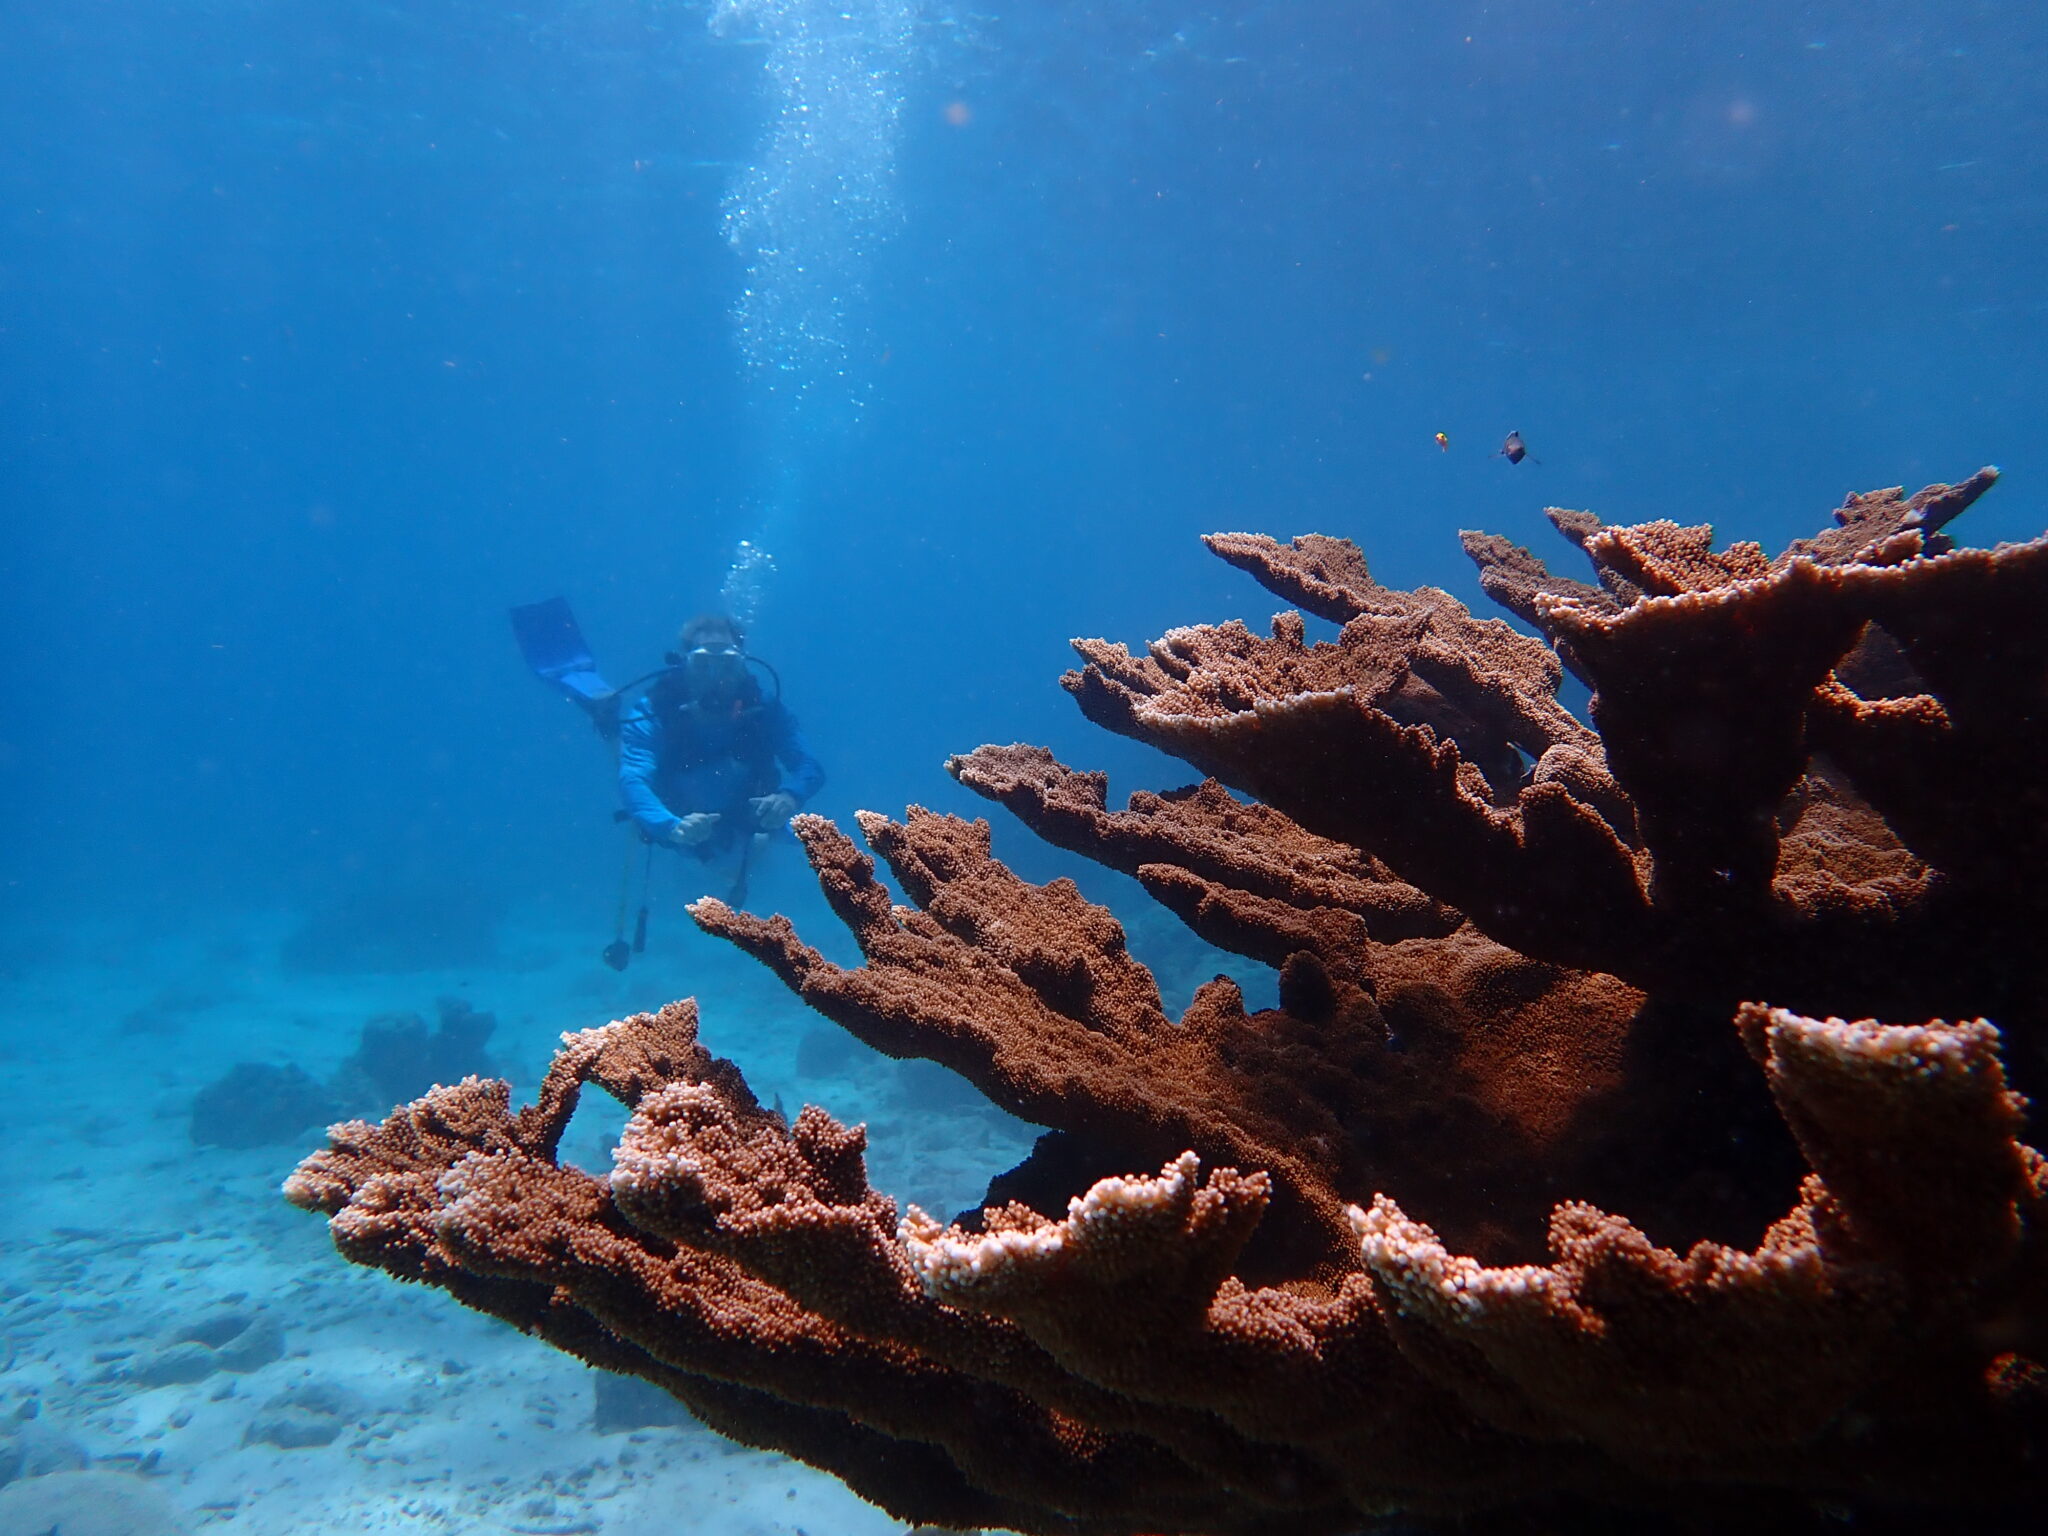 A large reddish-brown coral with a diver in the background